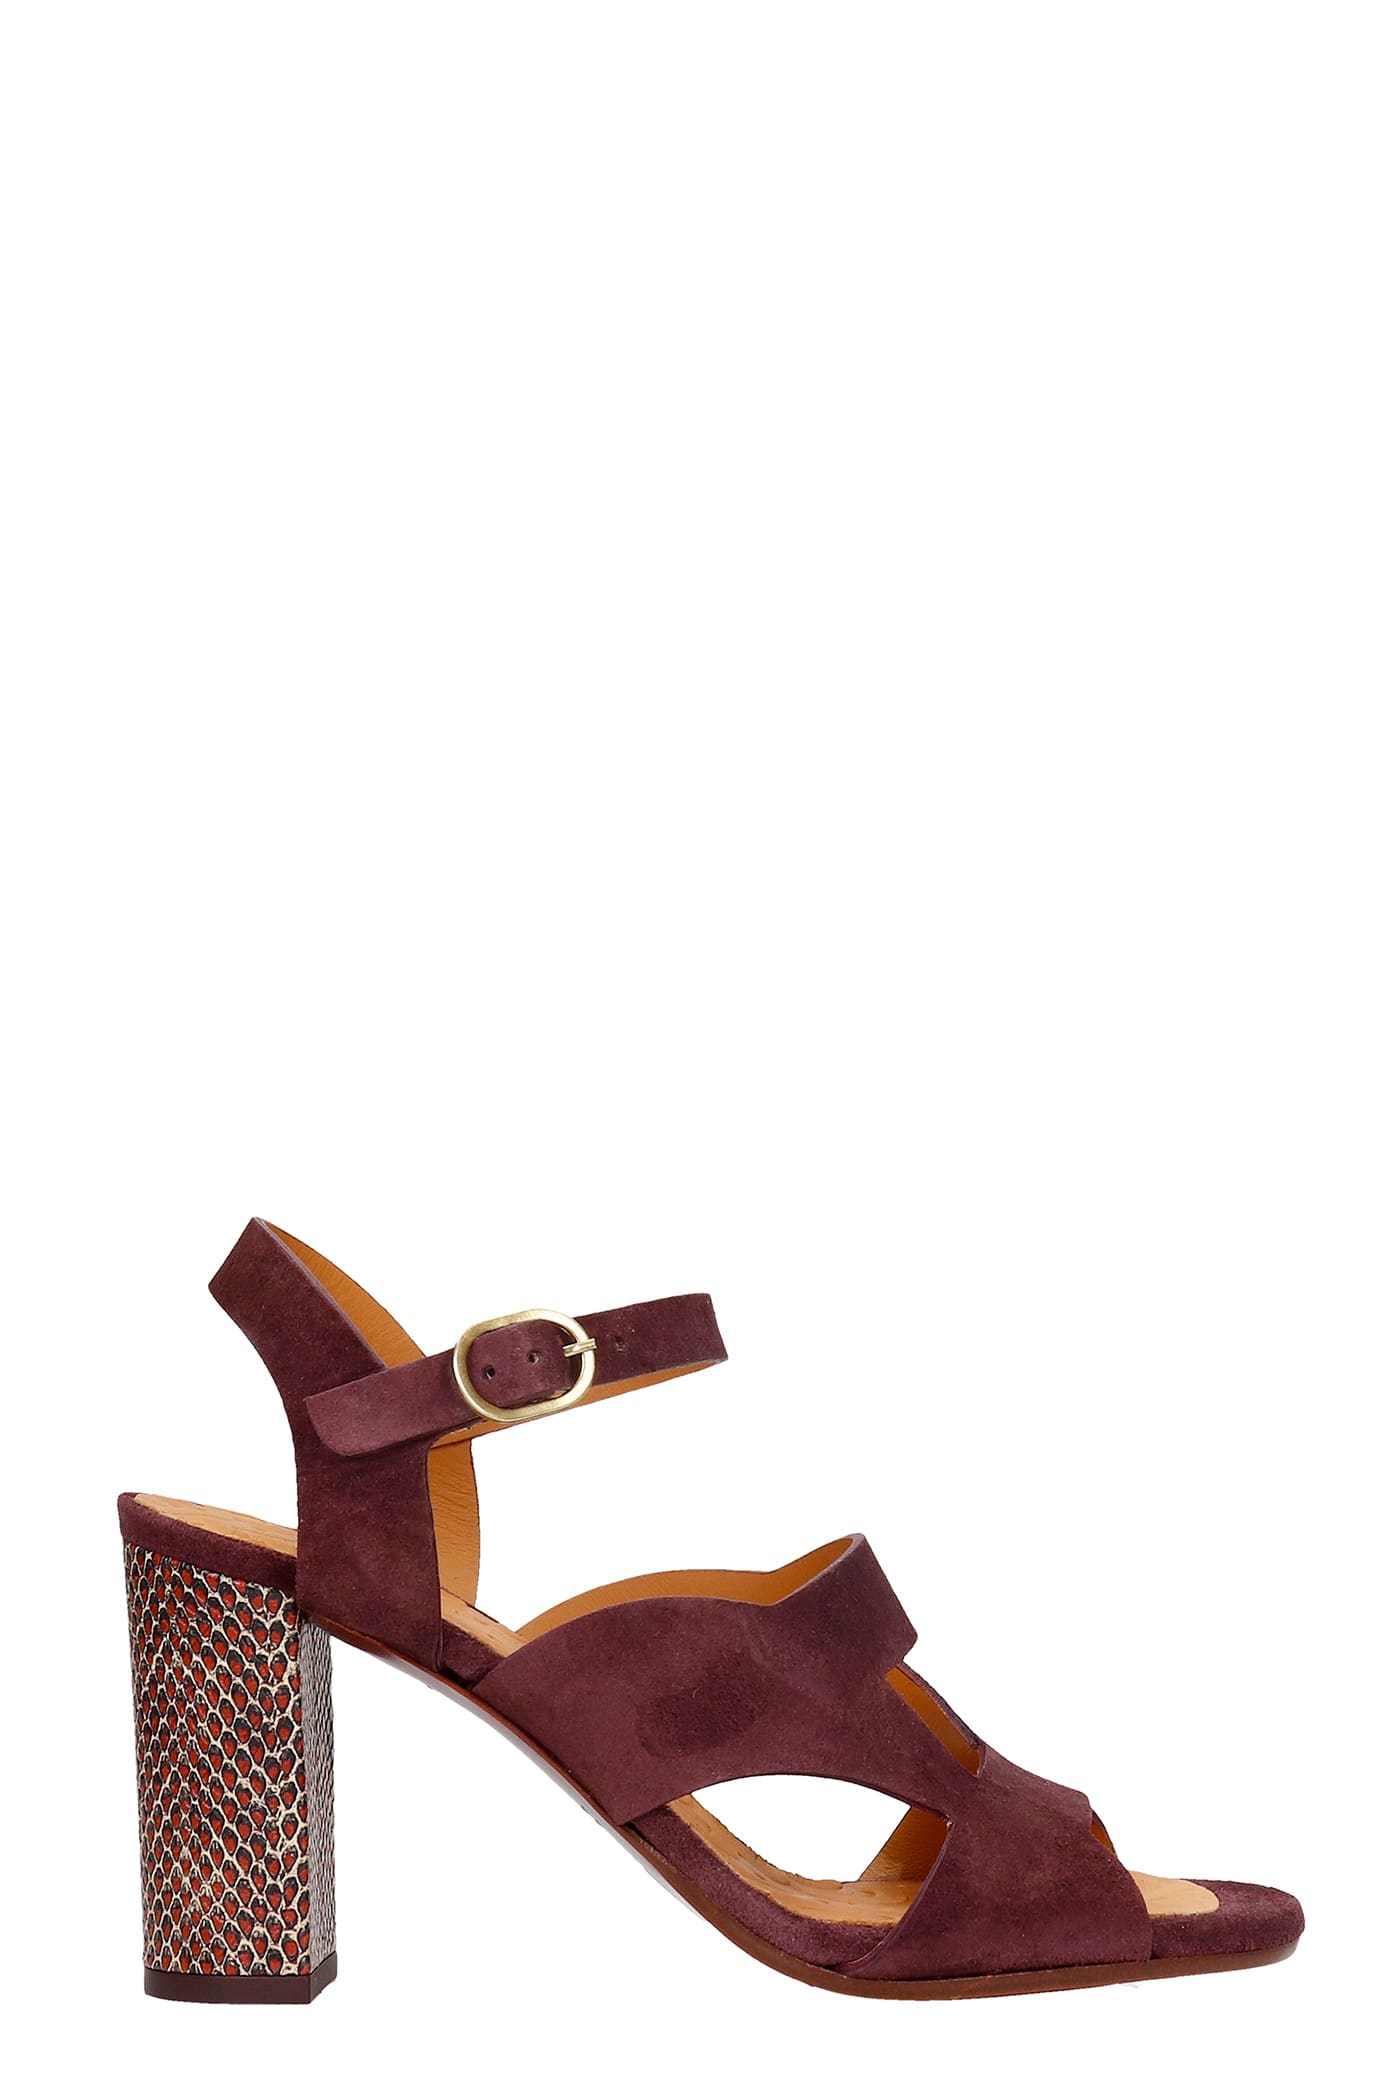 Chie Mihara Bader Sandals In Bordeaux Suede